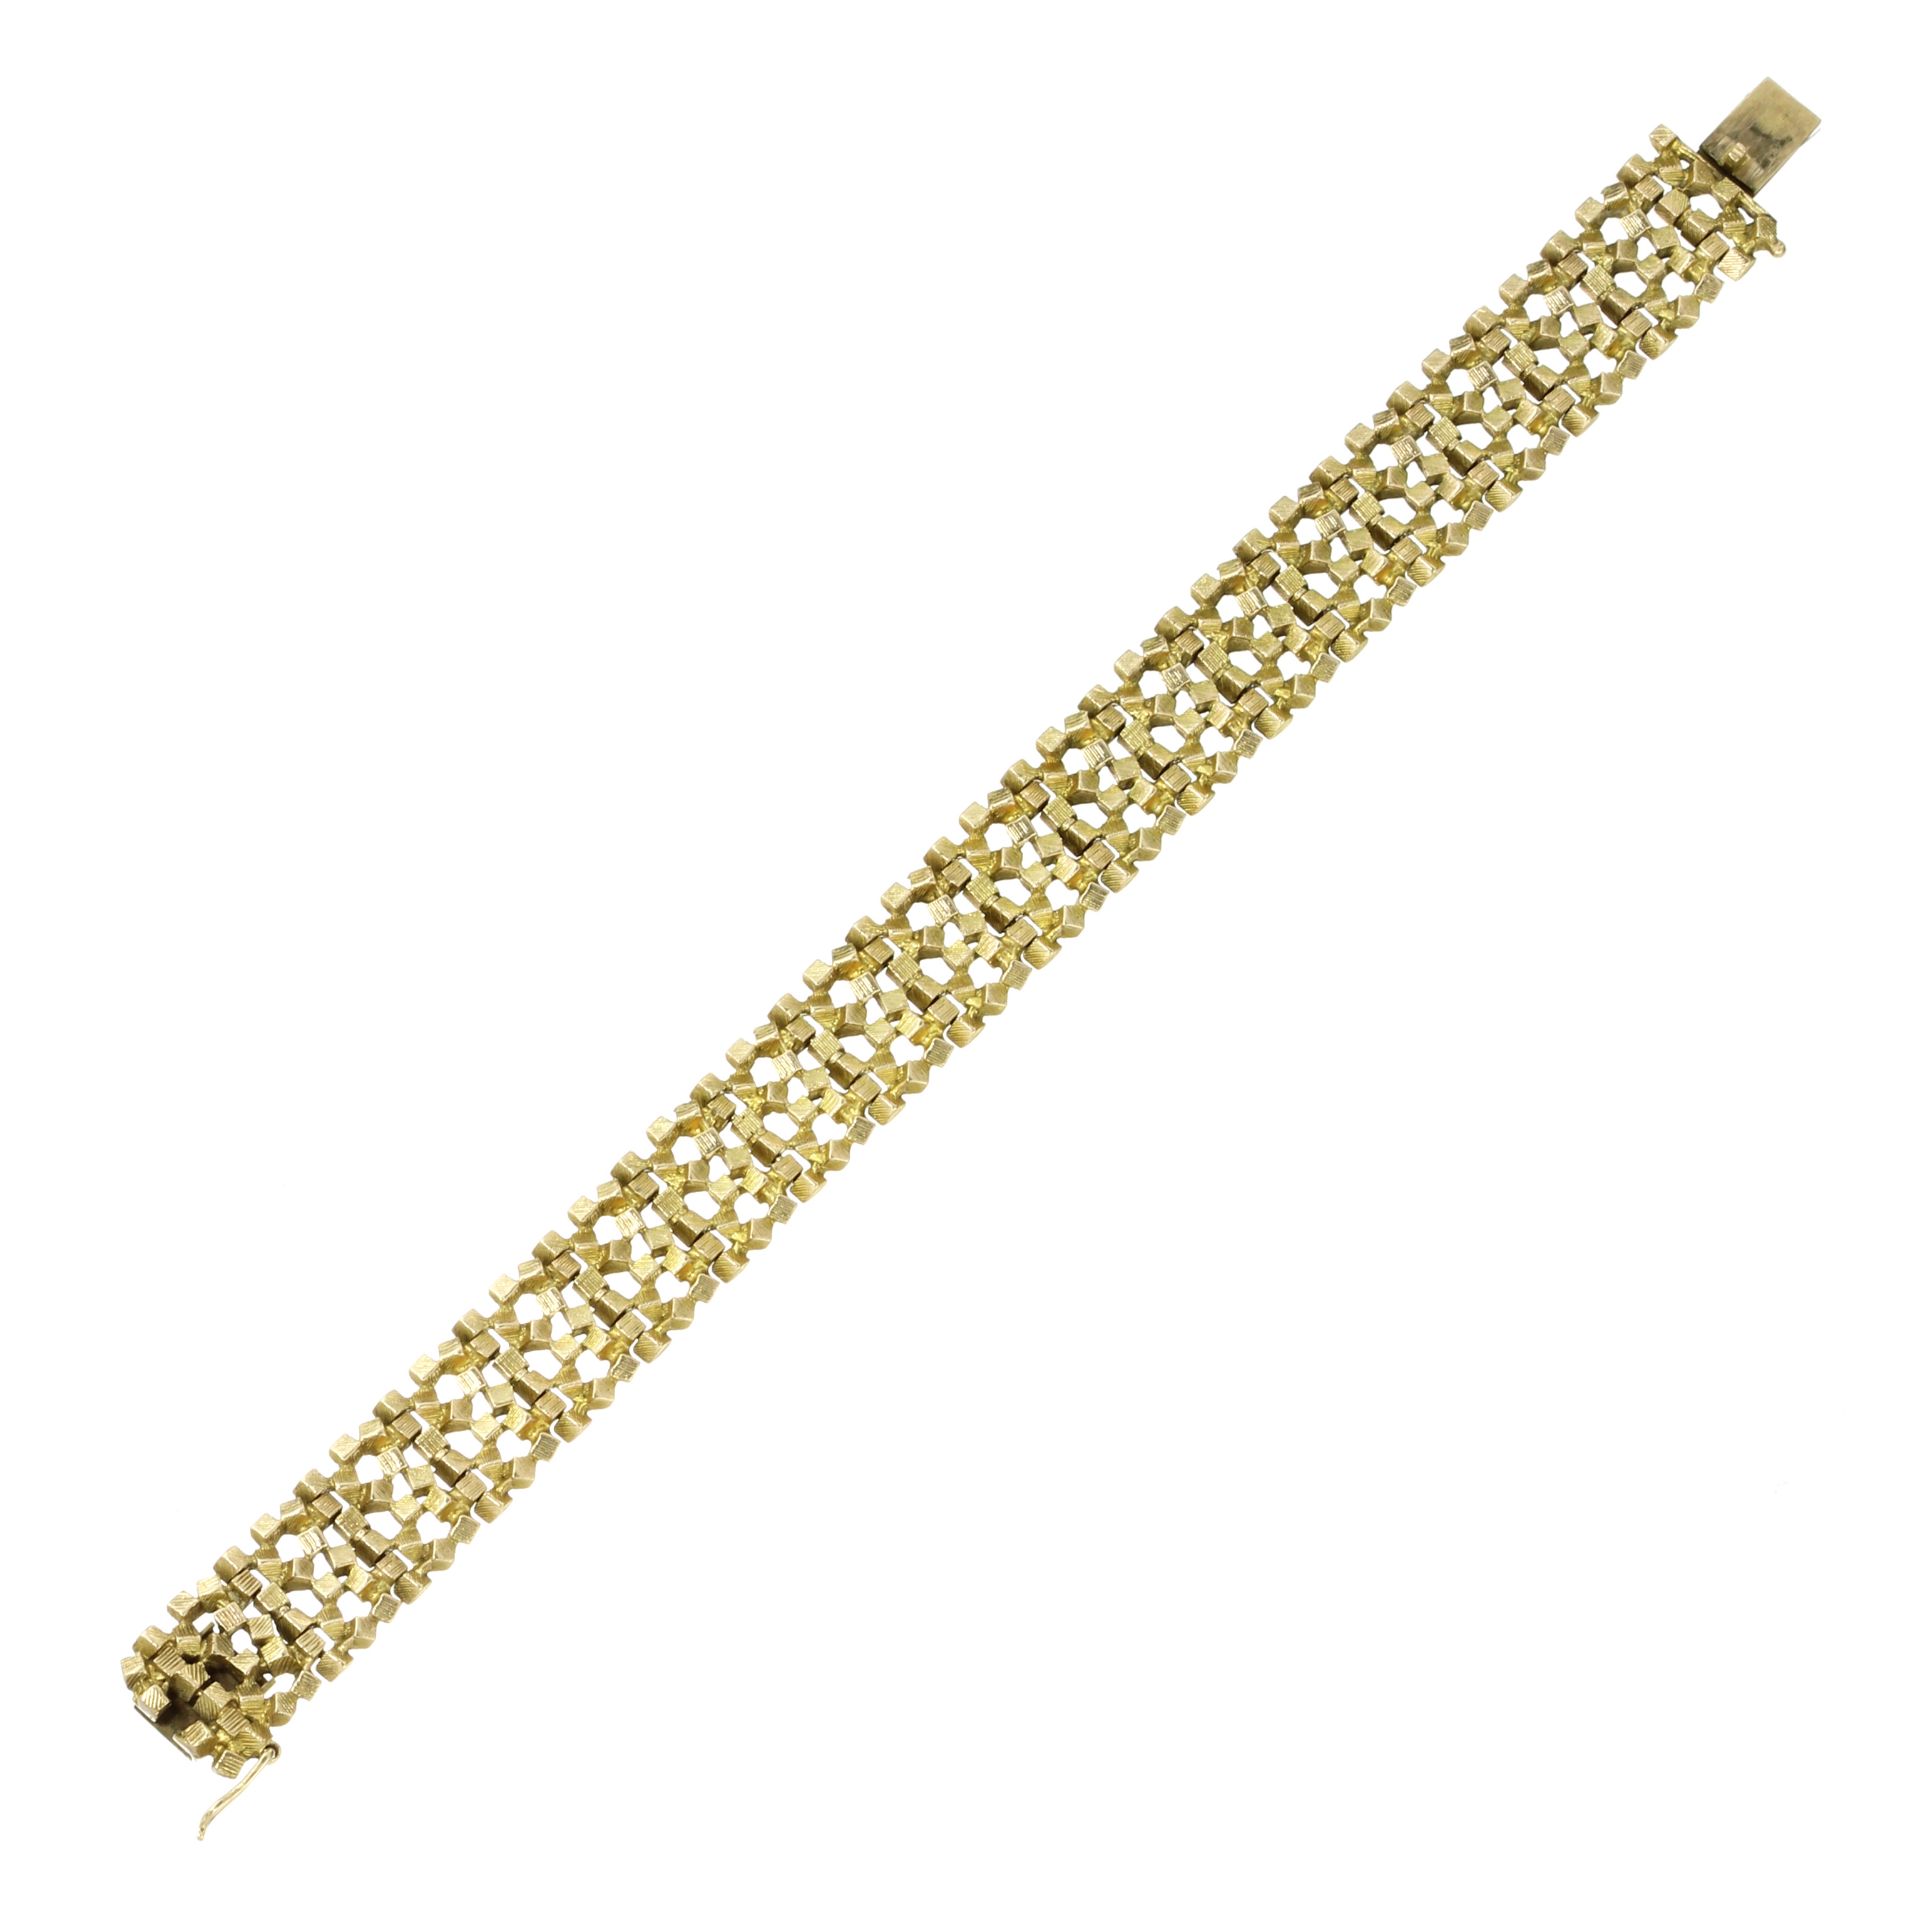 A FANCY LINK BRACELET, SANNIT & STEIN 1970 in yellow gold by Sannit & Stein designed as a row of